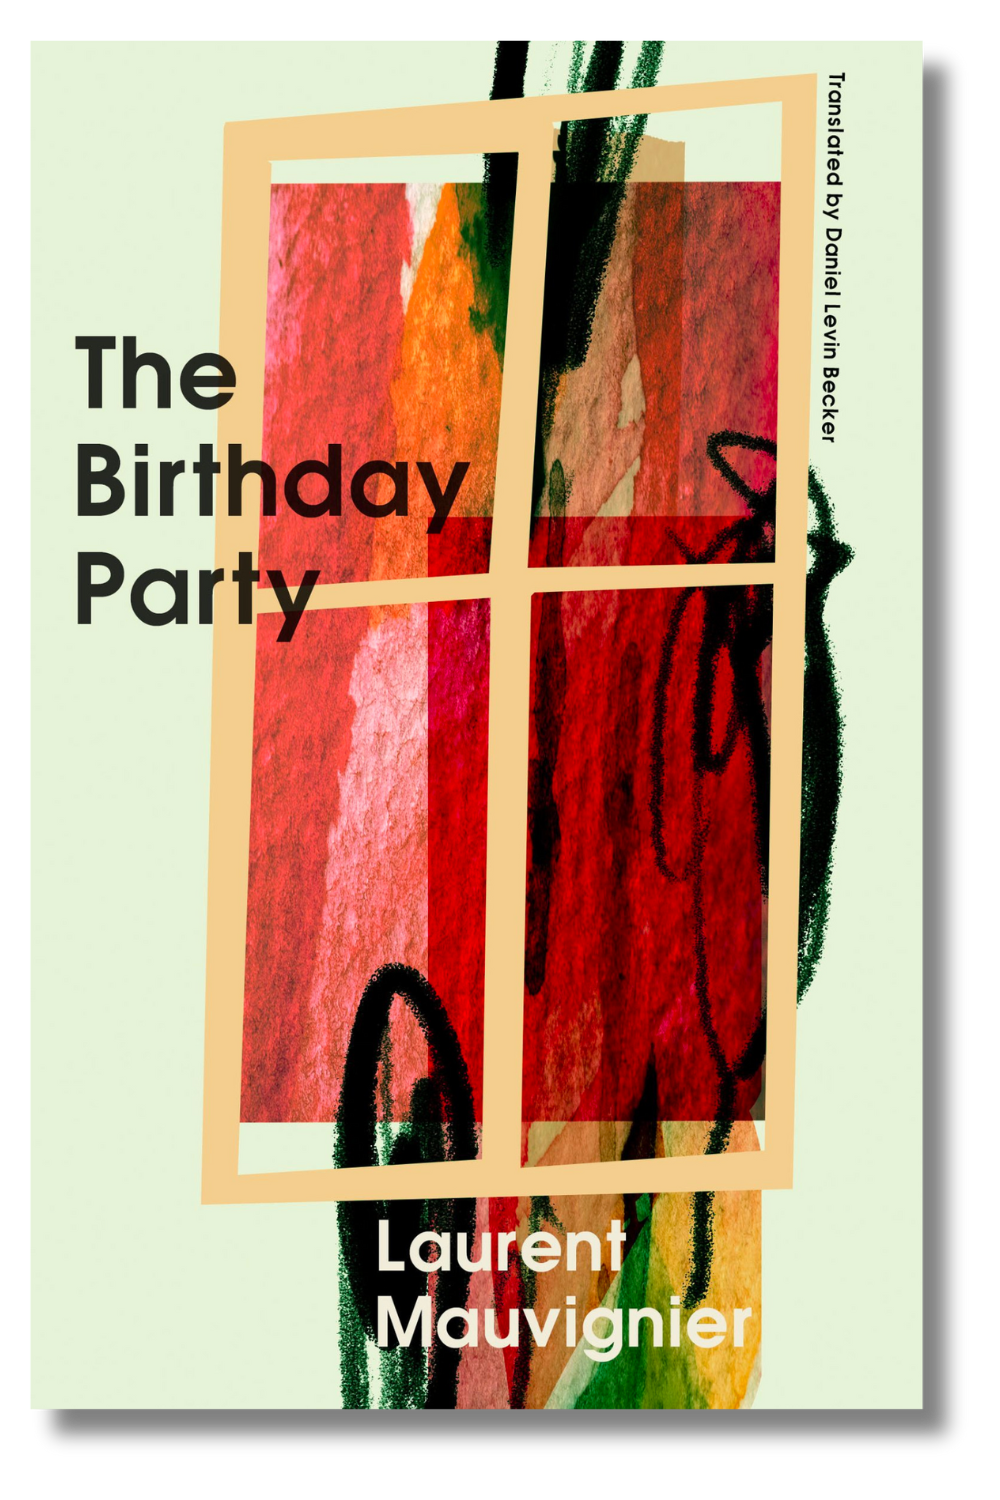 The cover of "The Birthday Party" by Laurent Mauvignier, translated by Daniel Levin Becker